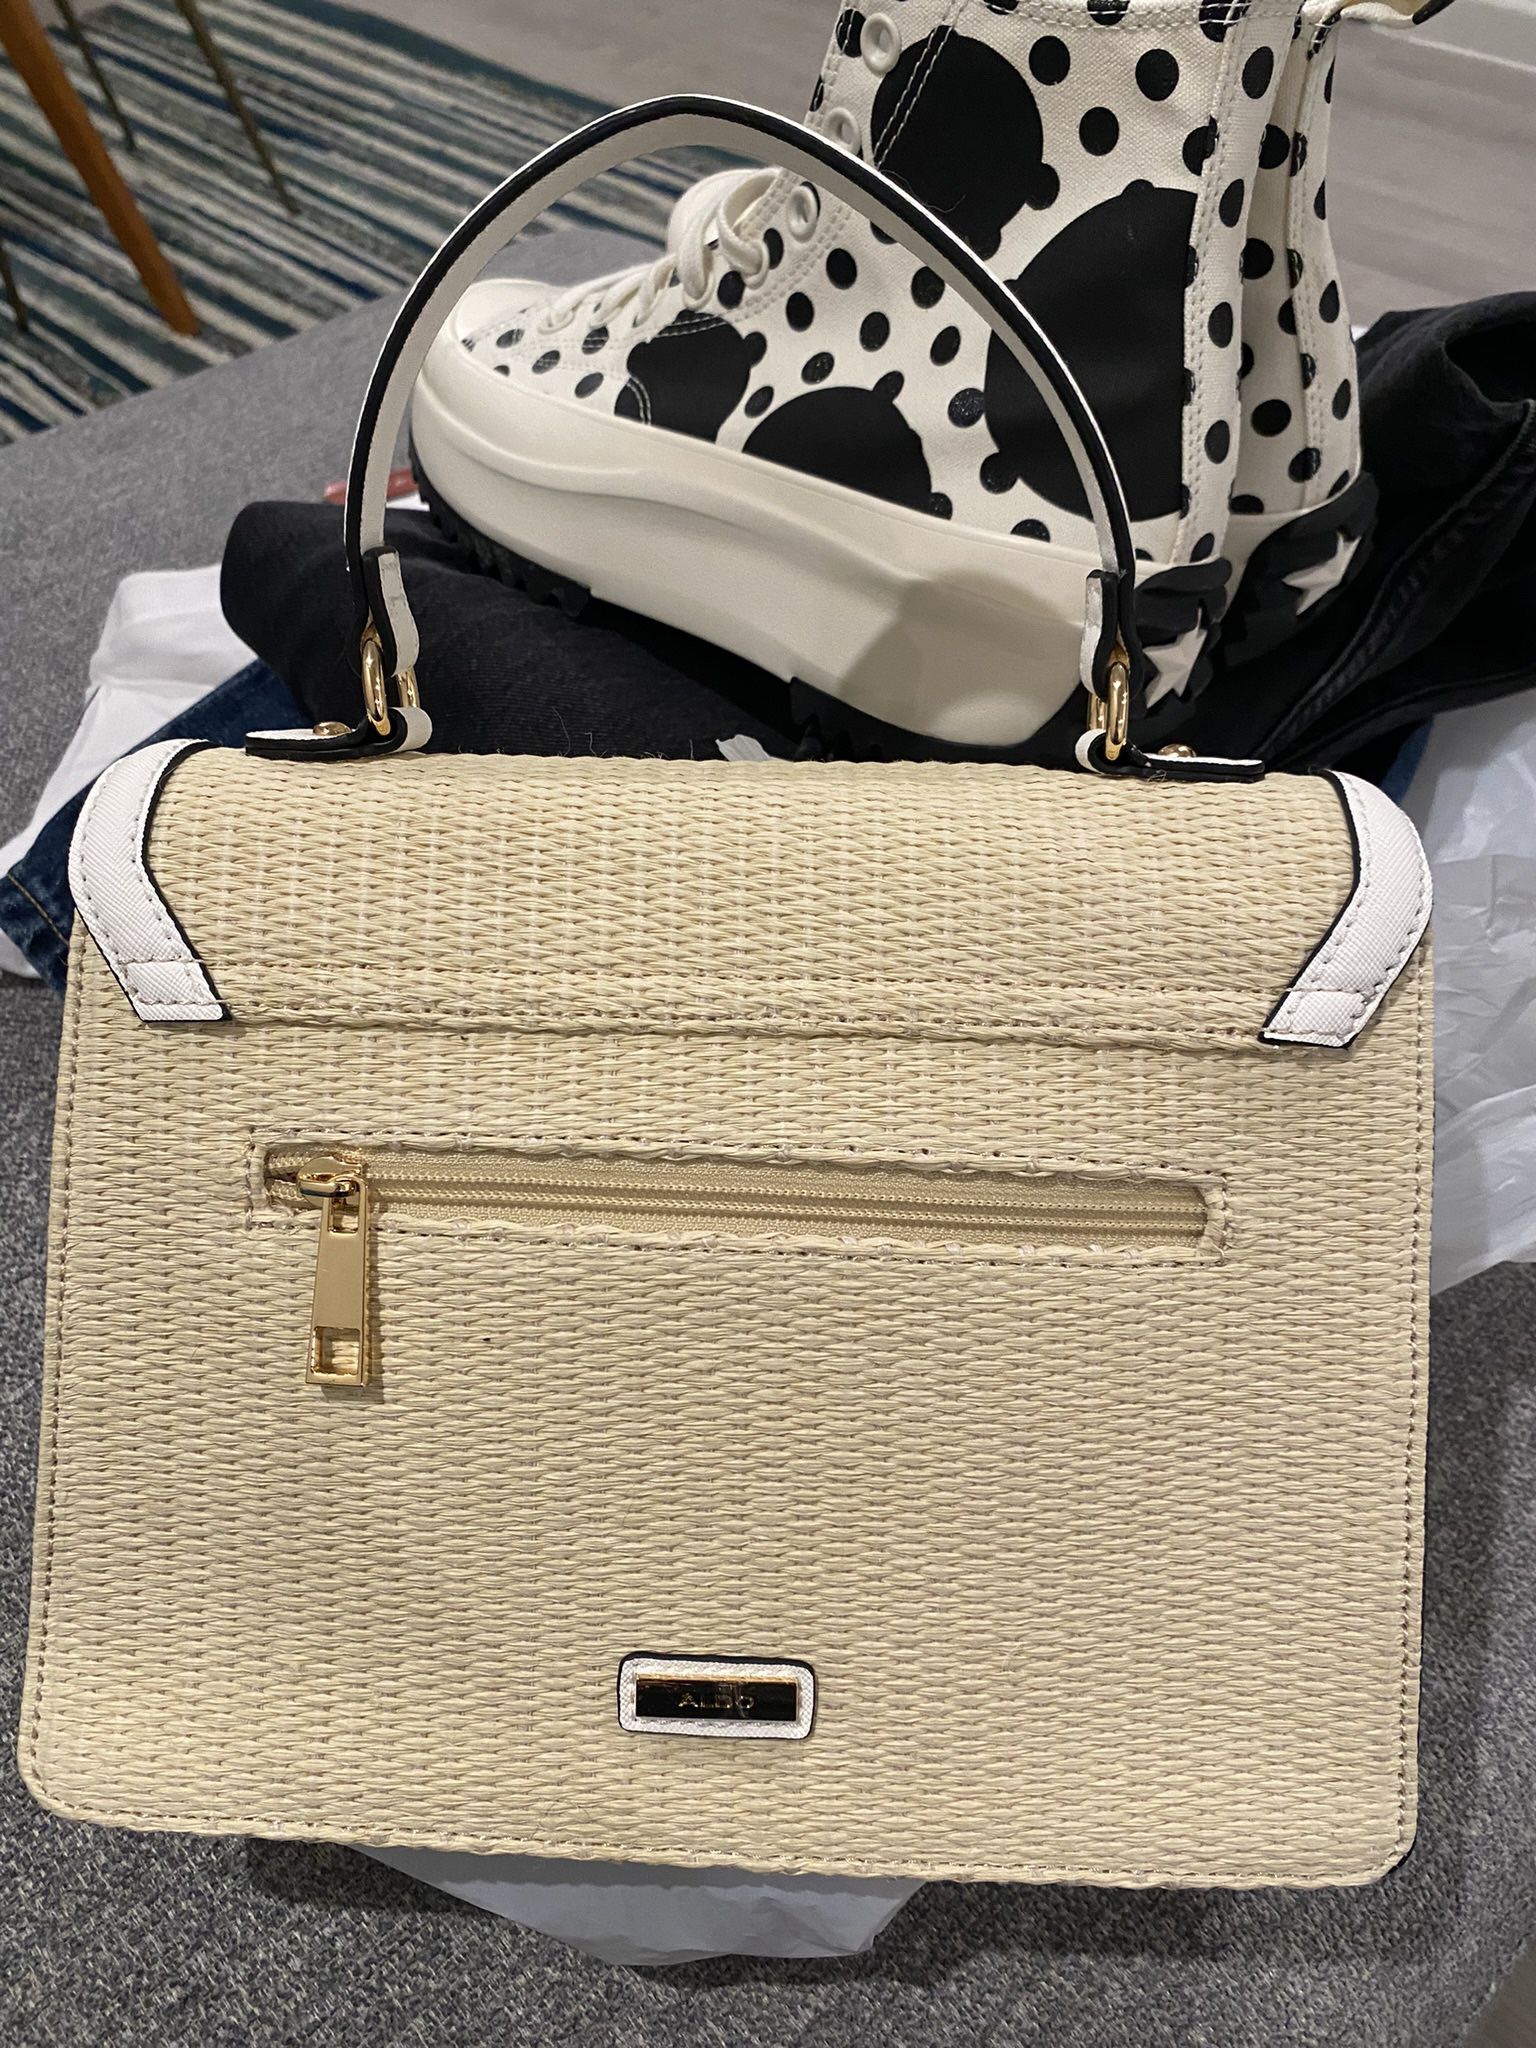 Aldo bags for Sale in Queens, NY - OfferUp